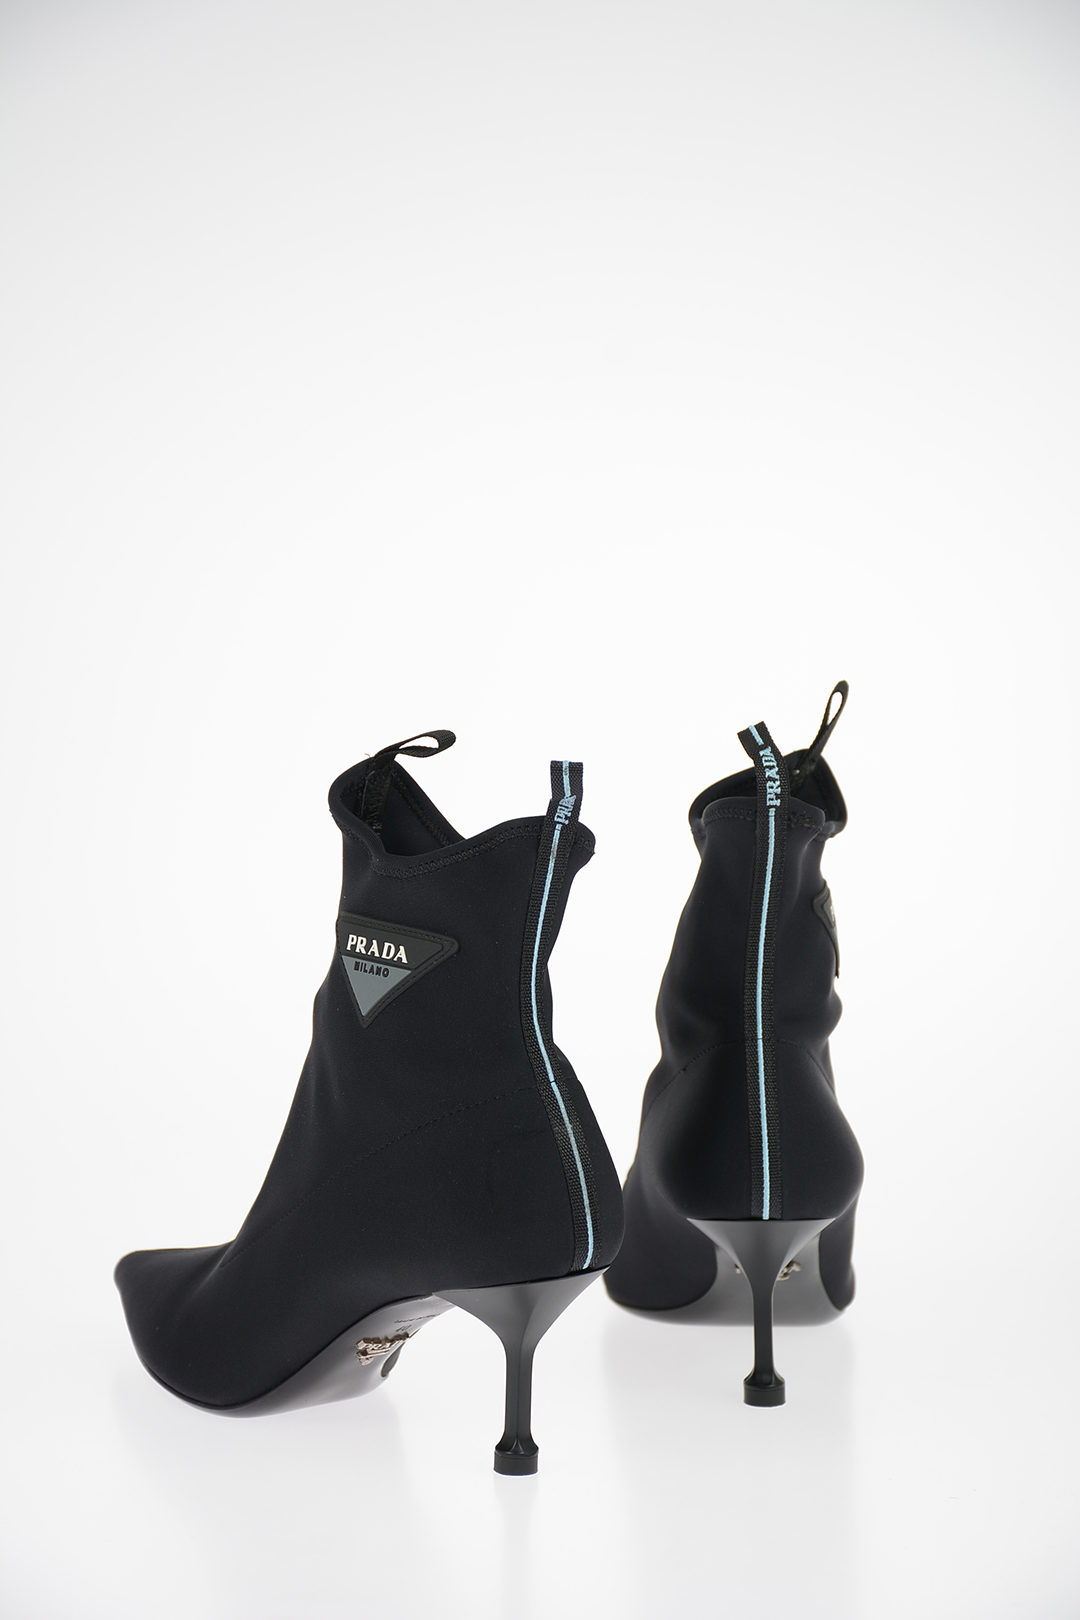 prada leather and neoprene ankle boots